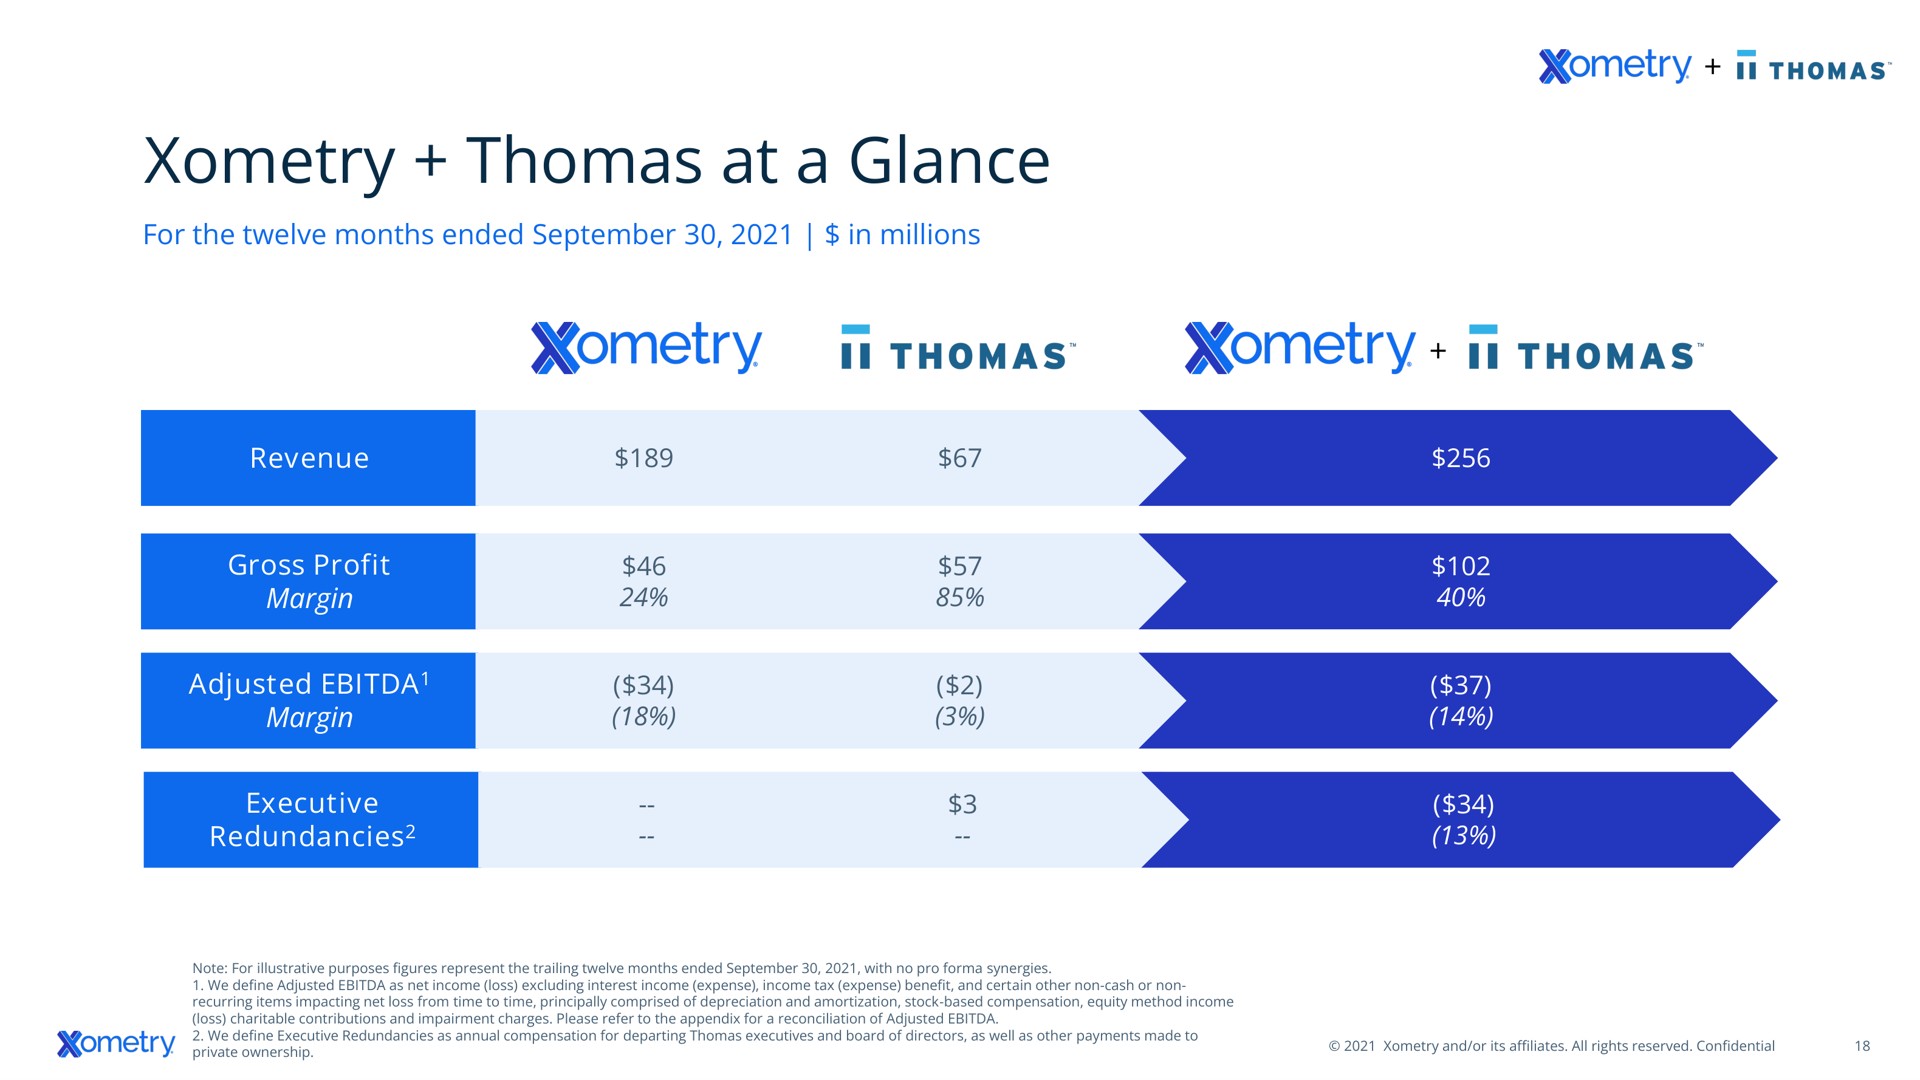 at a glance | Xometry